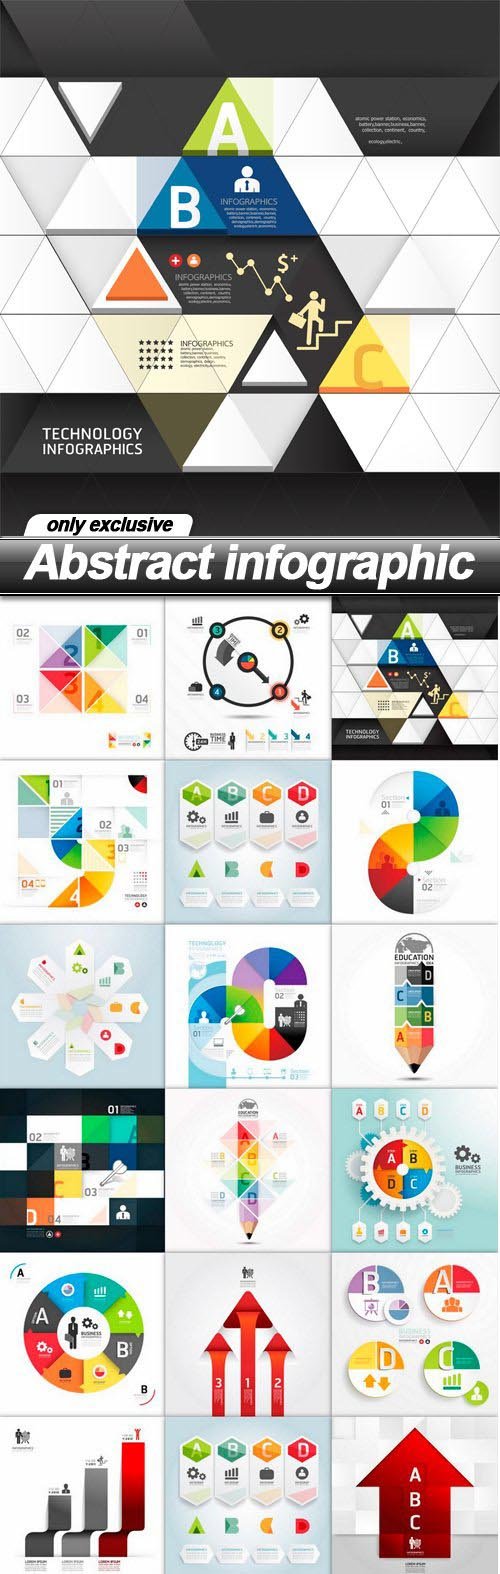 Abstract infographic - 20 EPS